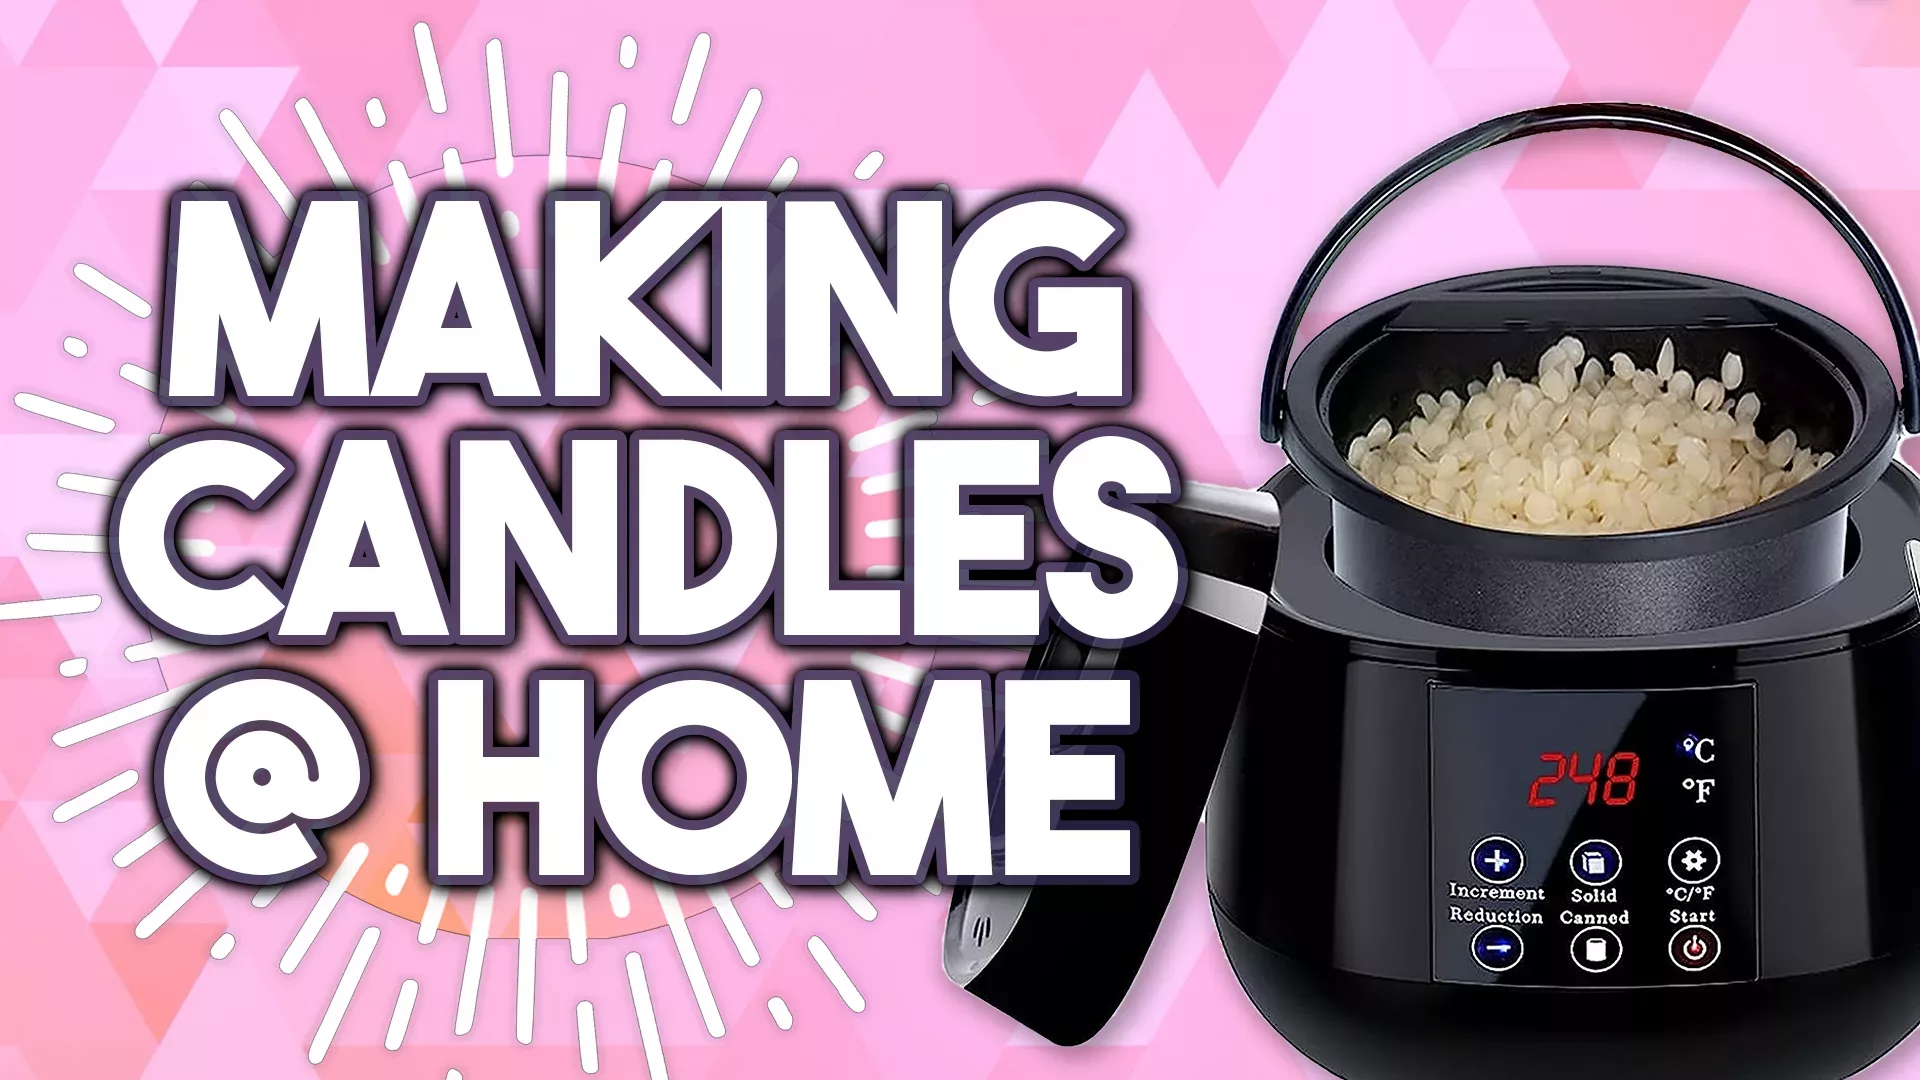 Making Candles at Home with PEEWF Wax Melting Machine & Candle Making Kit